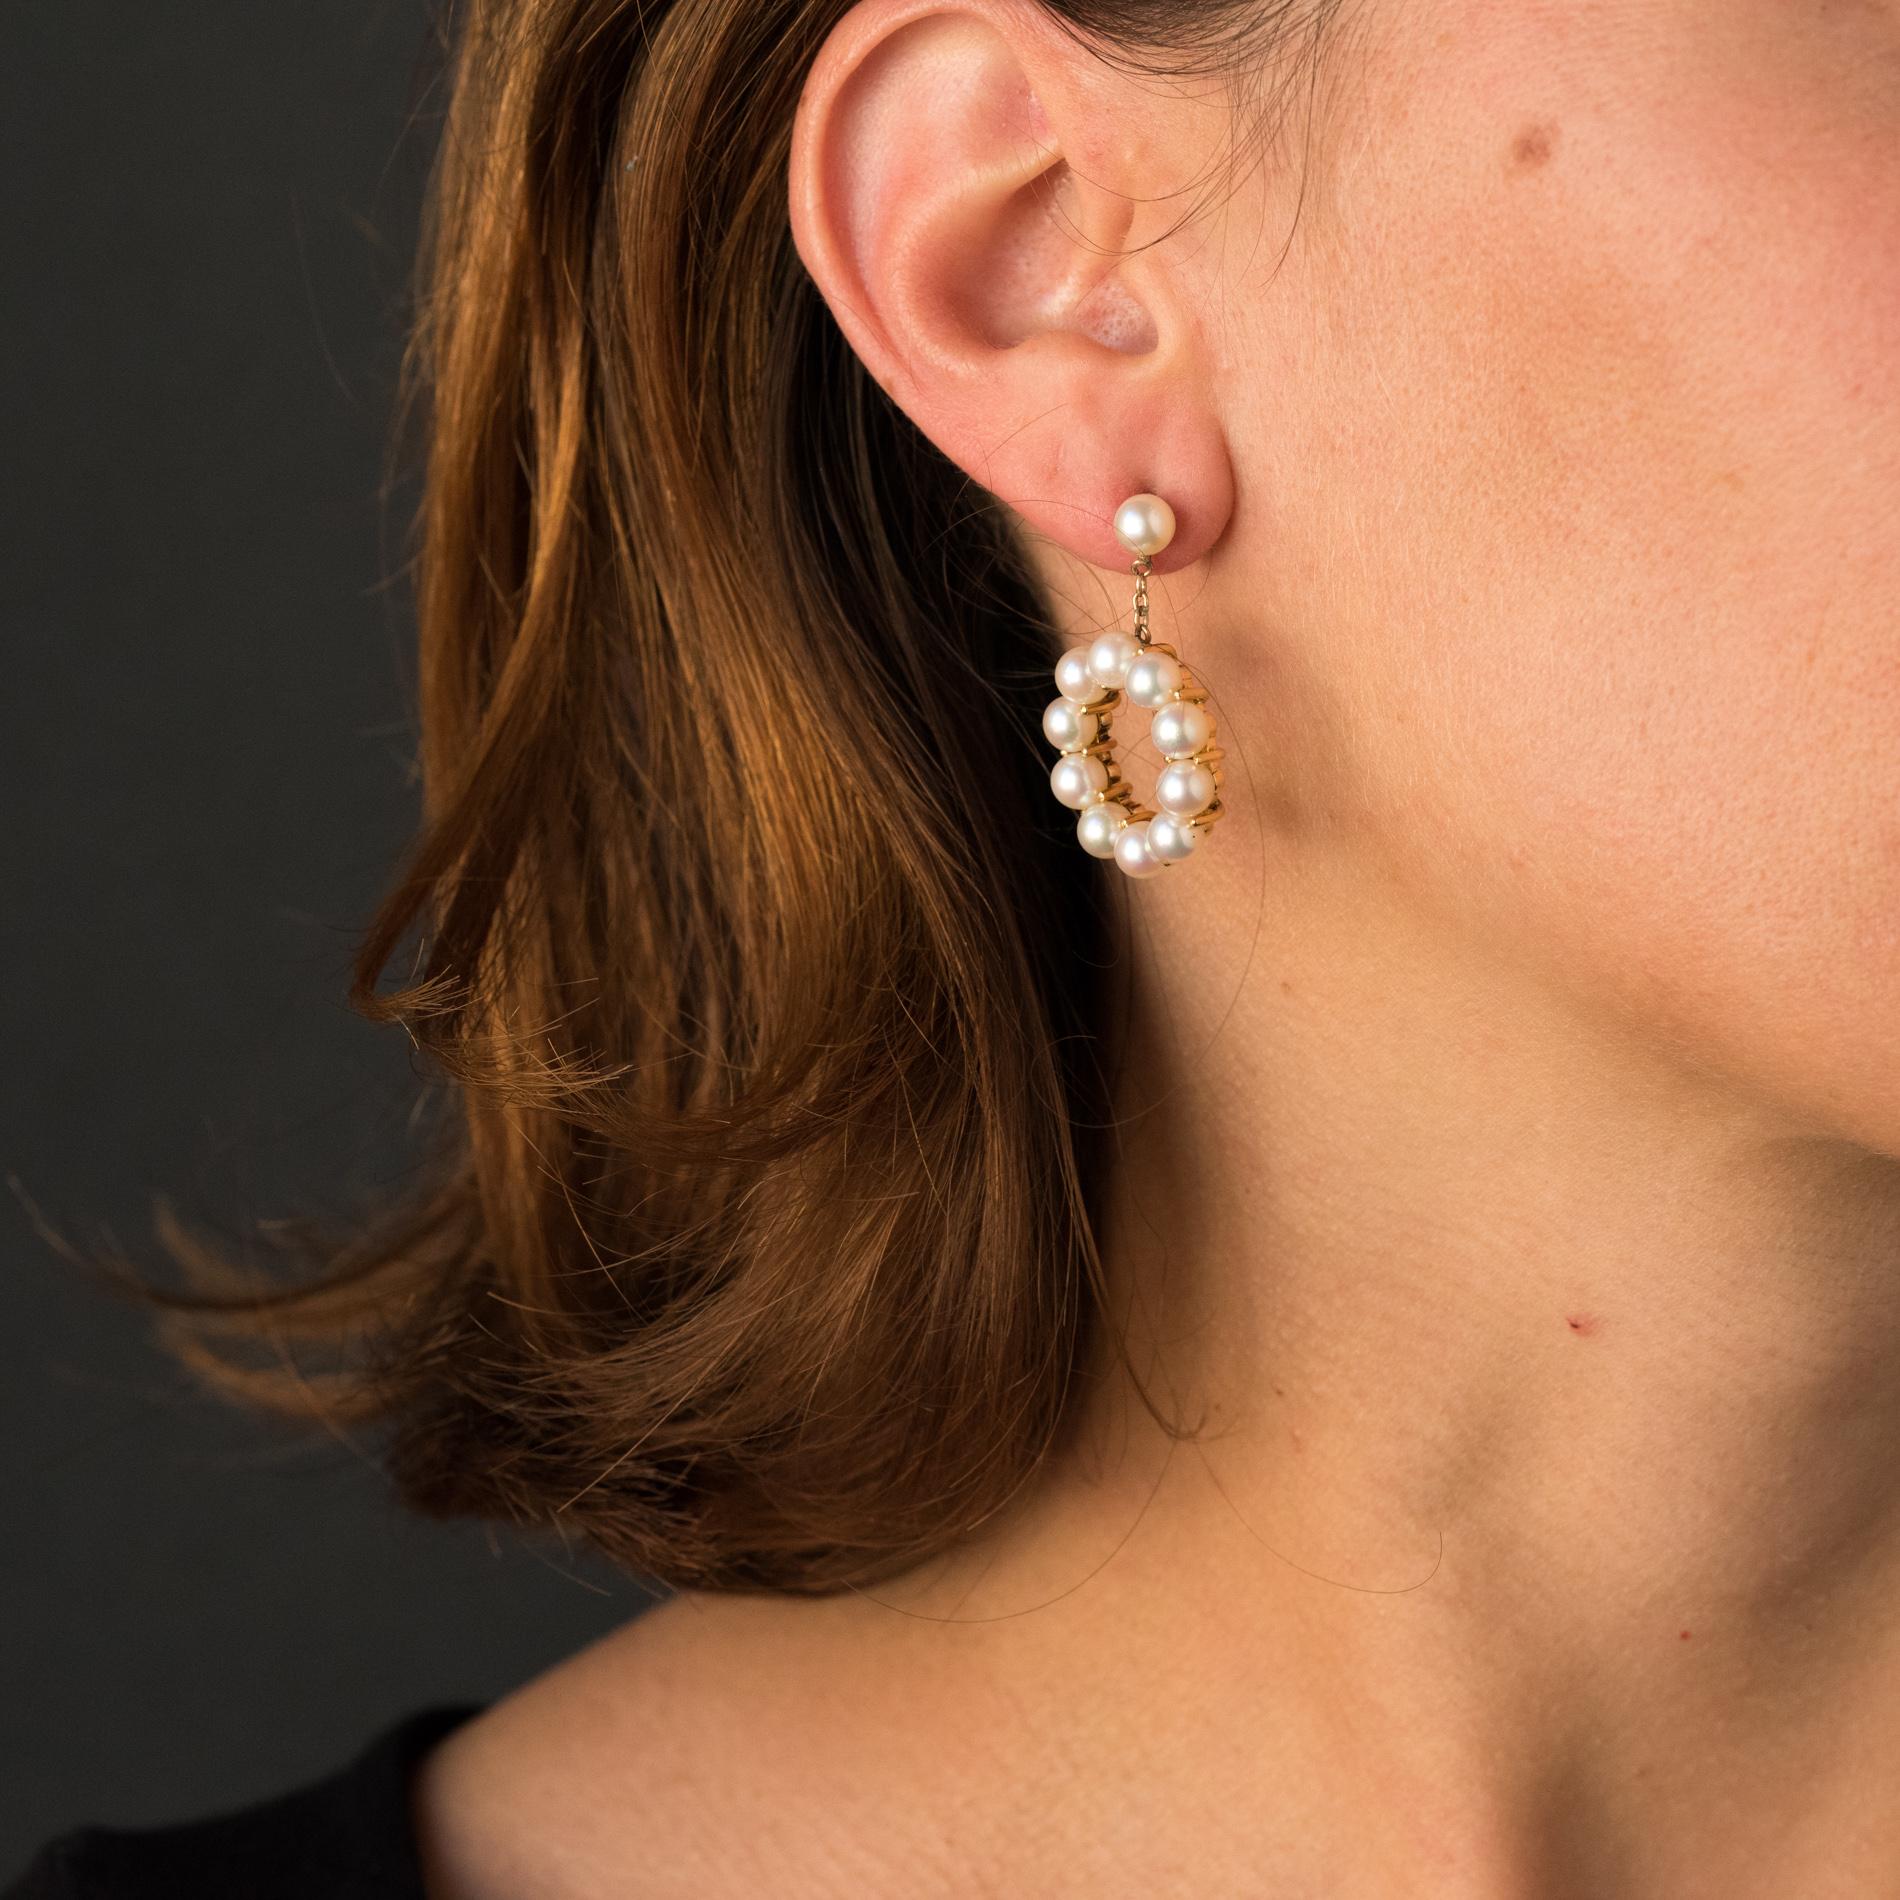 For pierced ears.
Pair of earrings in 9 carats yellow gold.
Each earring is composed of a cultured pearl, which holds by a chain, a circle adorned with cultured pearls set on all its turn. The pearls of these retro earrings have a pearly white